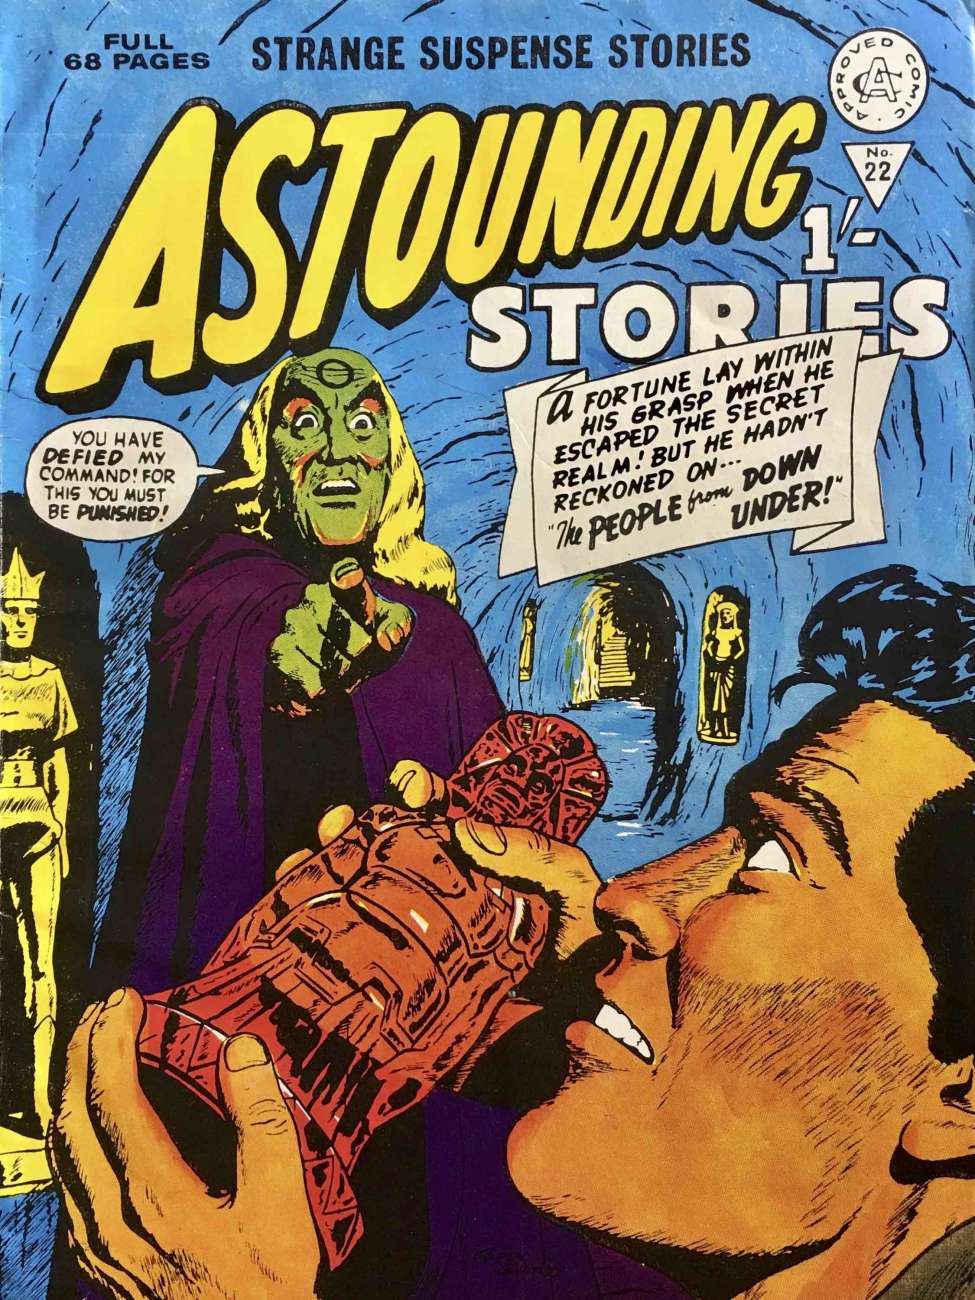 Book Cover For Astounding Stories 22